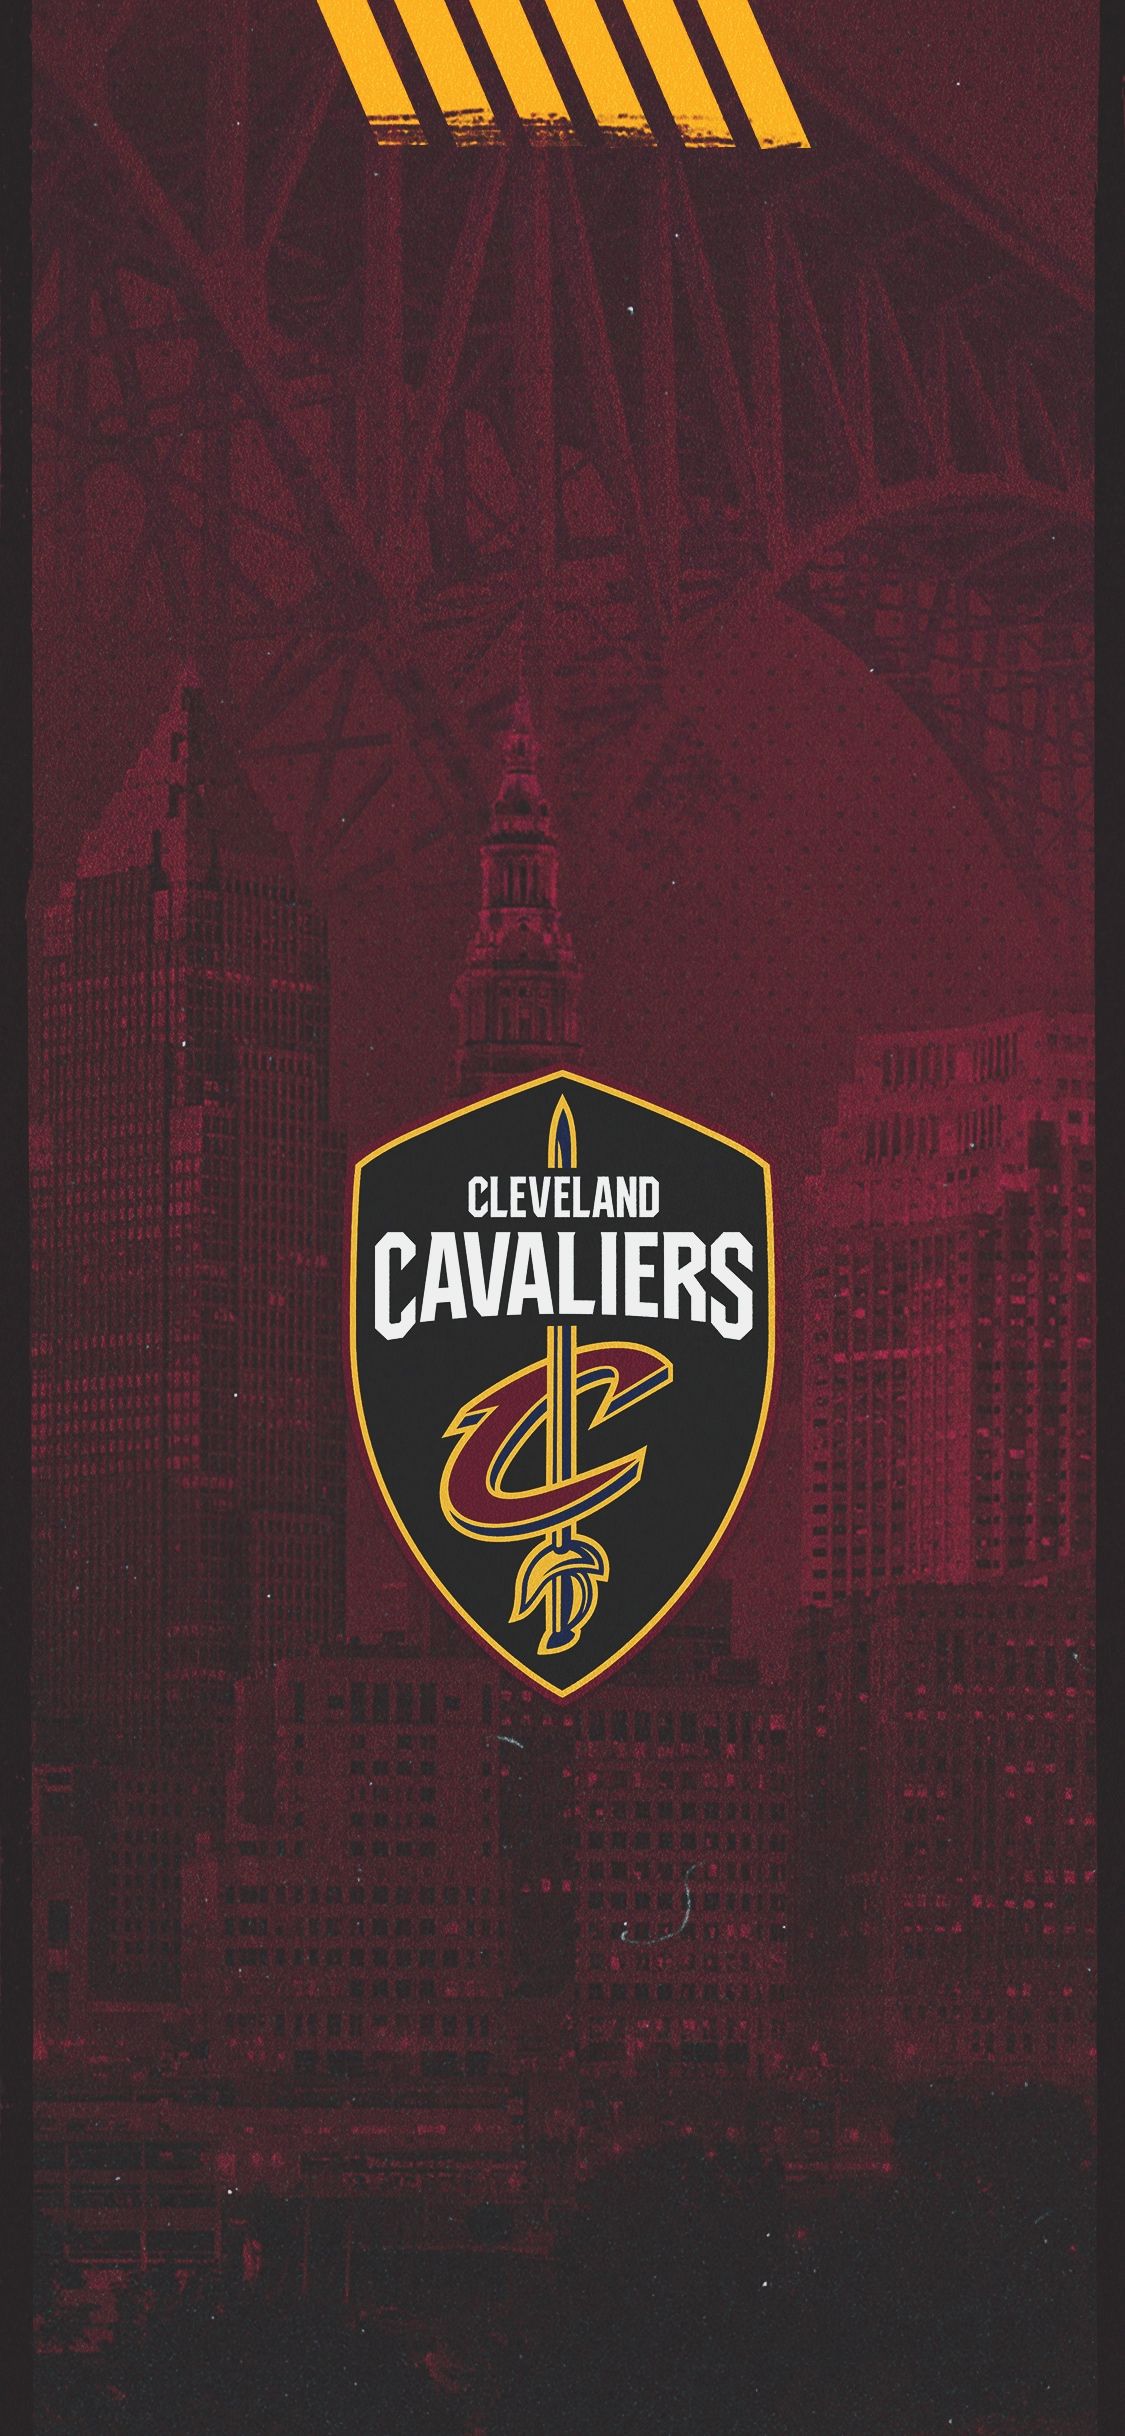 Cleveland Cavaliers Wallpapers  Pro Sports Backgrounds  Cavaliers  wallpaper Nba wallpapers Basketball wallpaper